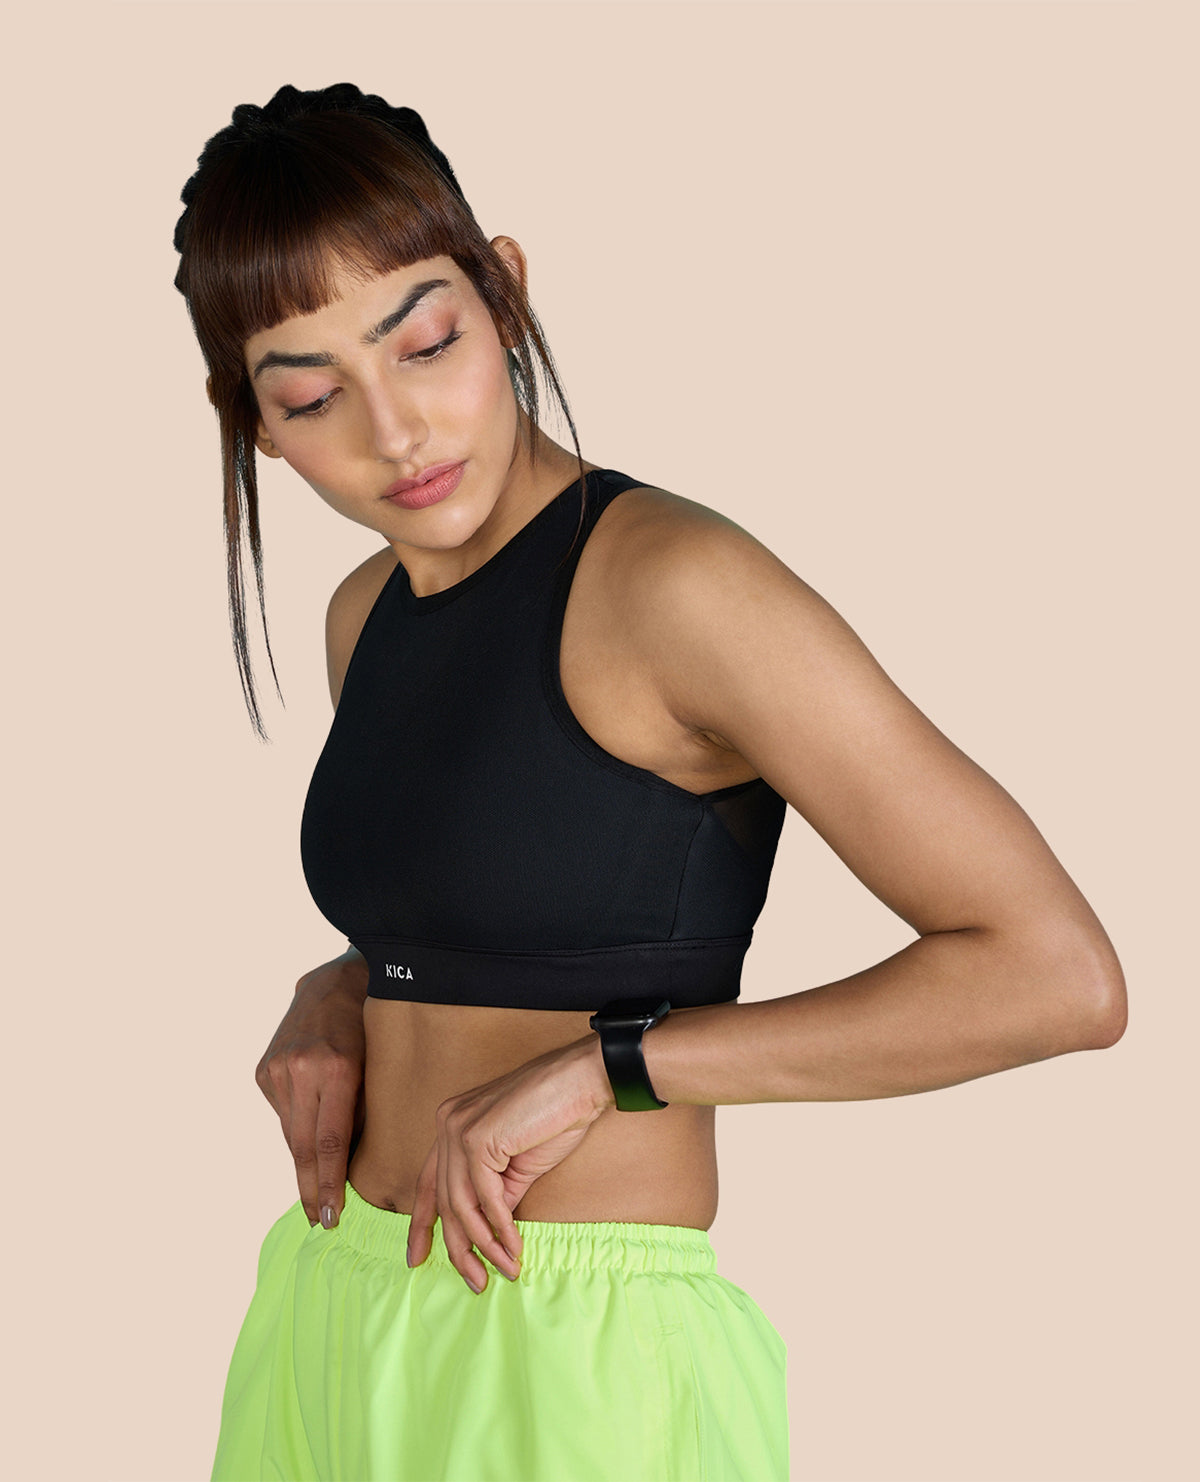 Topwear Kica Active  High Impact Mesh Sports Bra In Second Skn Fabric ⋆  Timelesswearshop